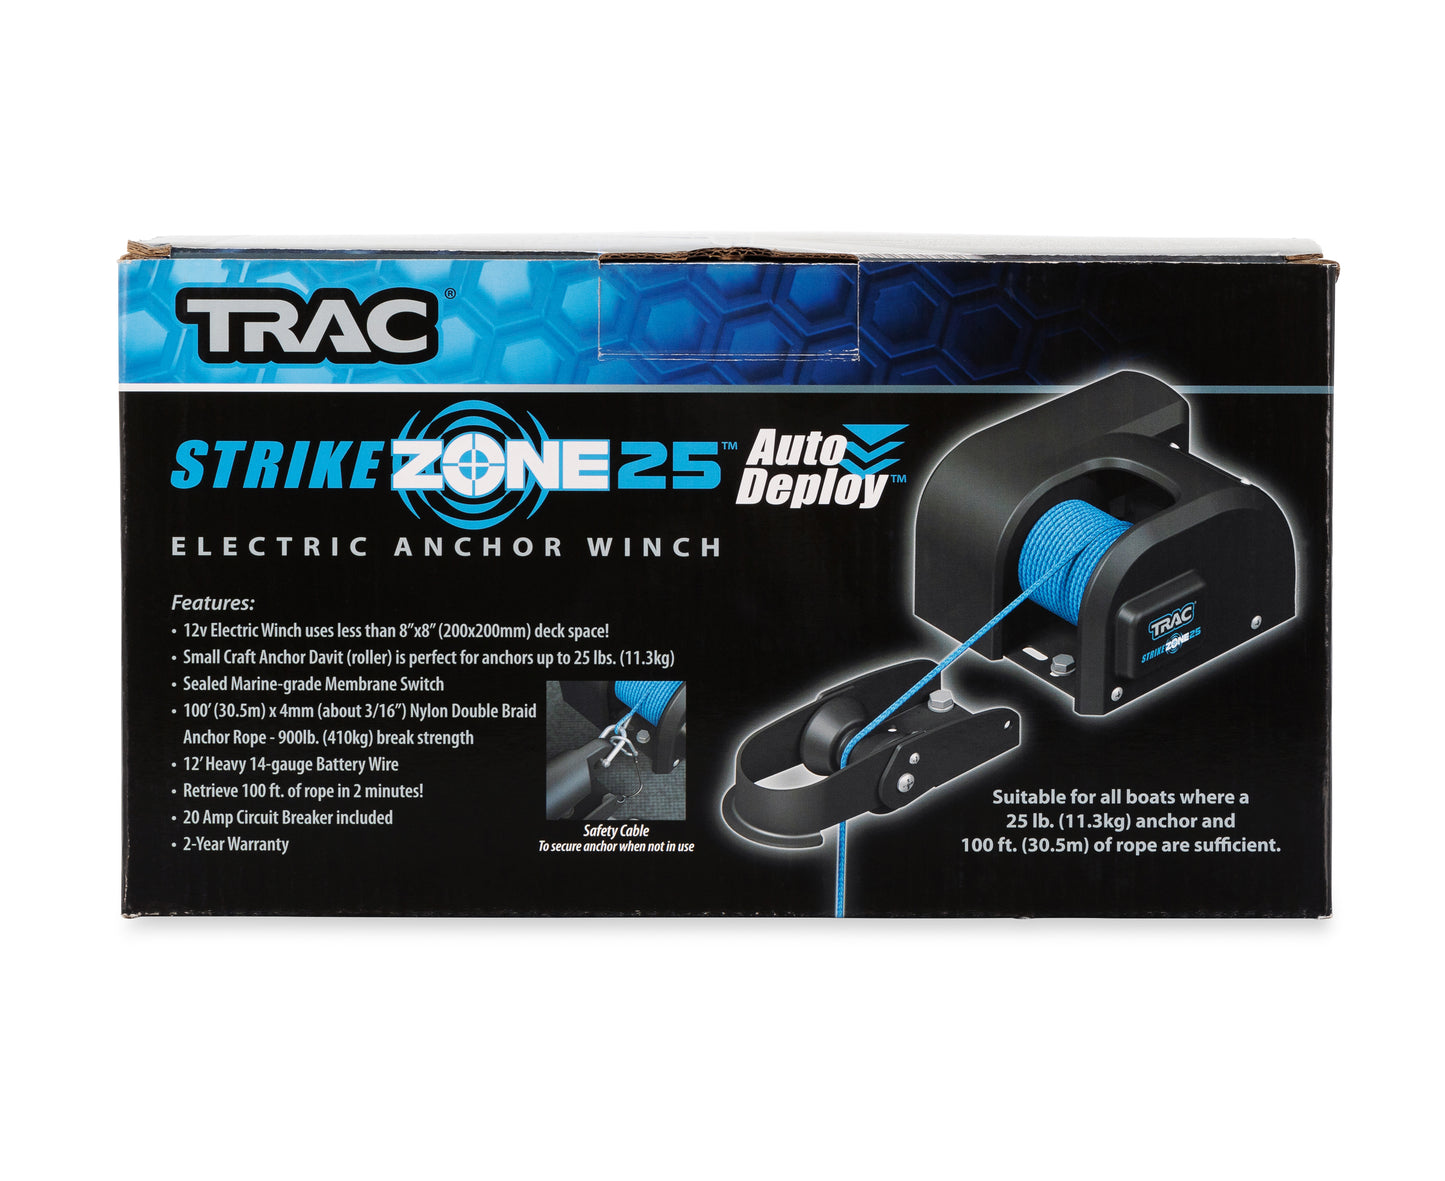 TRAC Outdoors Electric Anchor Winch, StrikeZone 25